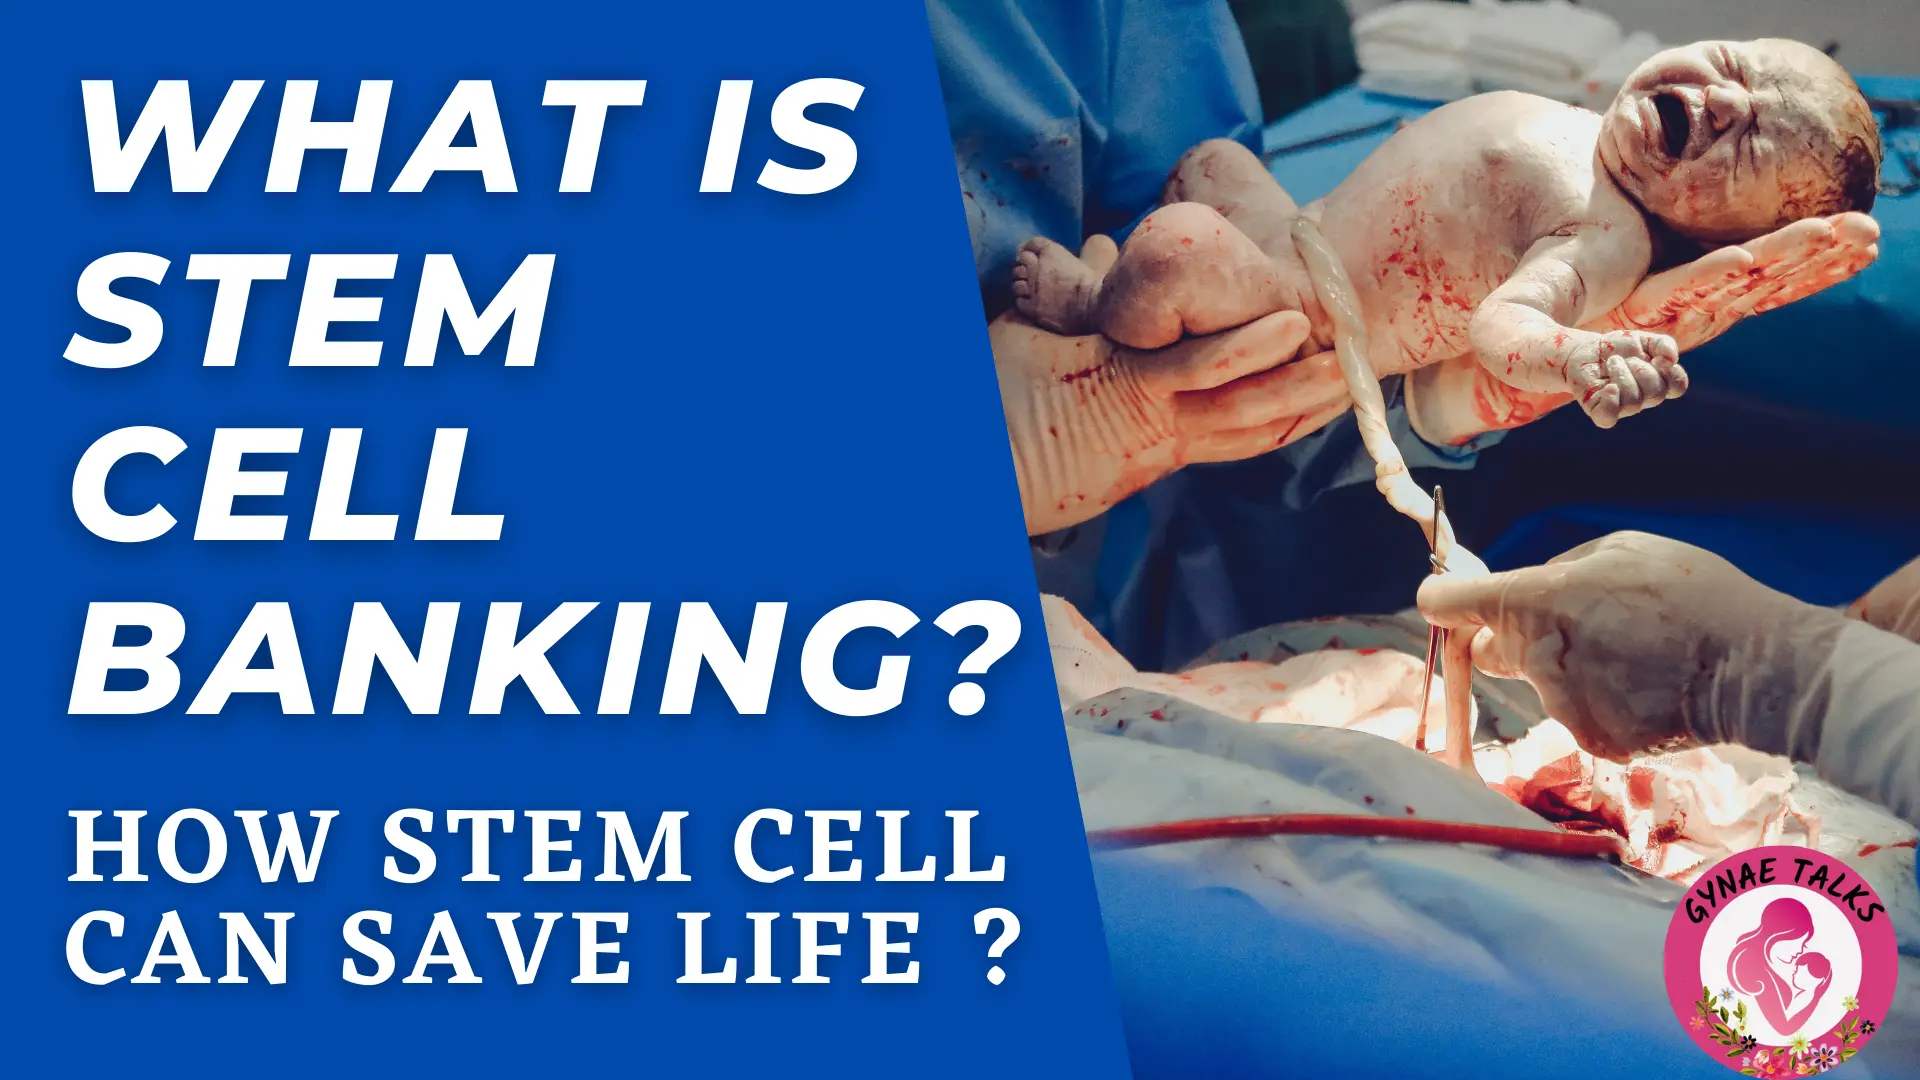 What is Stem Cell banking